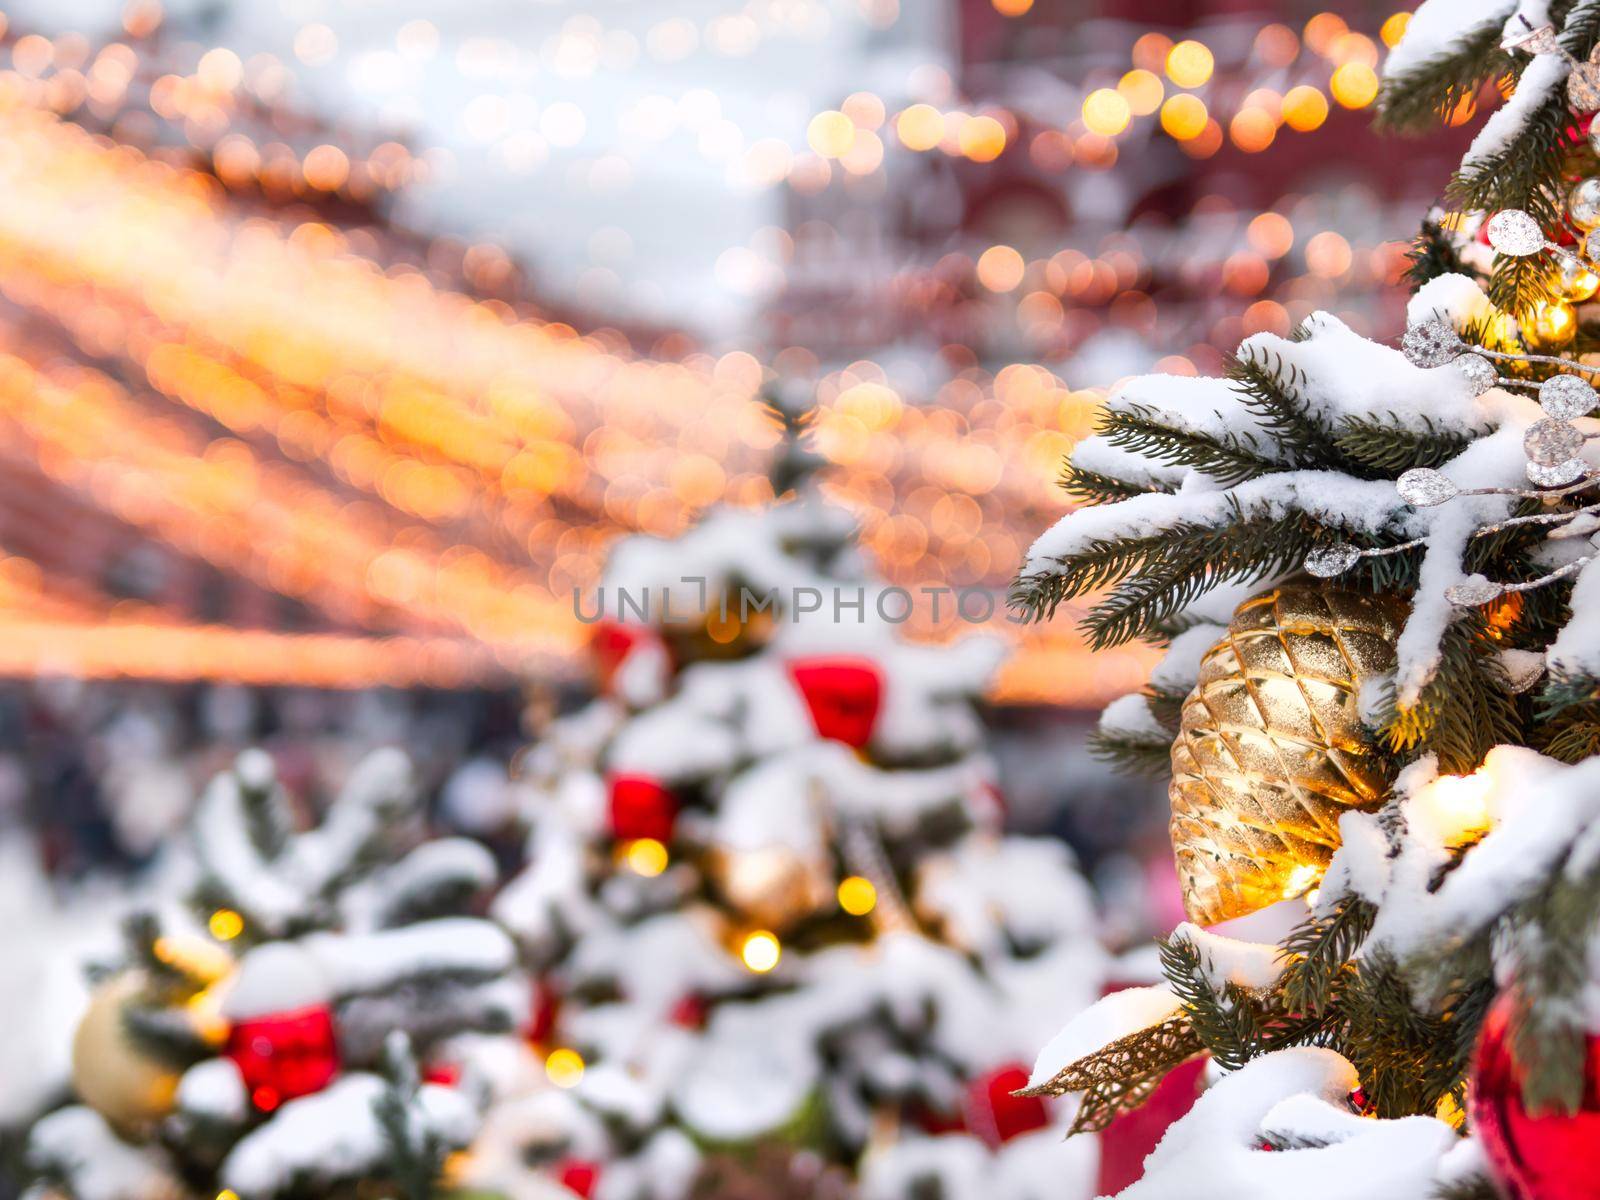 Christmas tree with colorful outdoor decorations. Fir tree decorated with light bulbs for New Year celebration. Moscow, Russia.